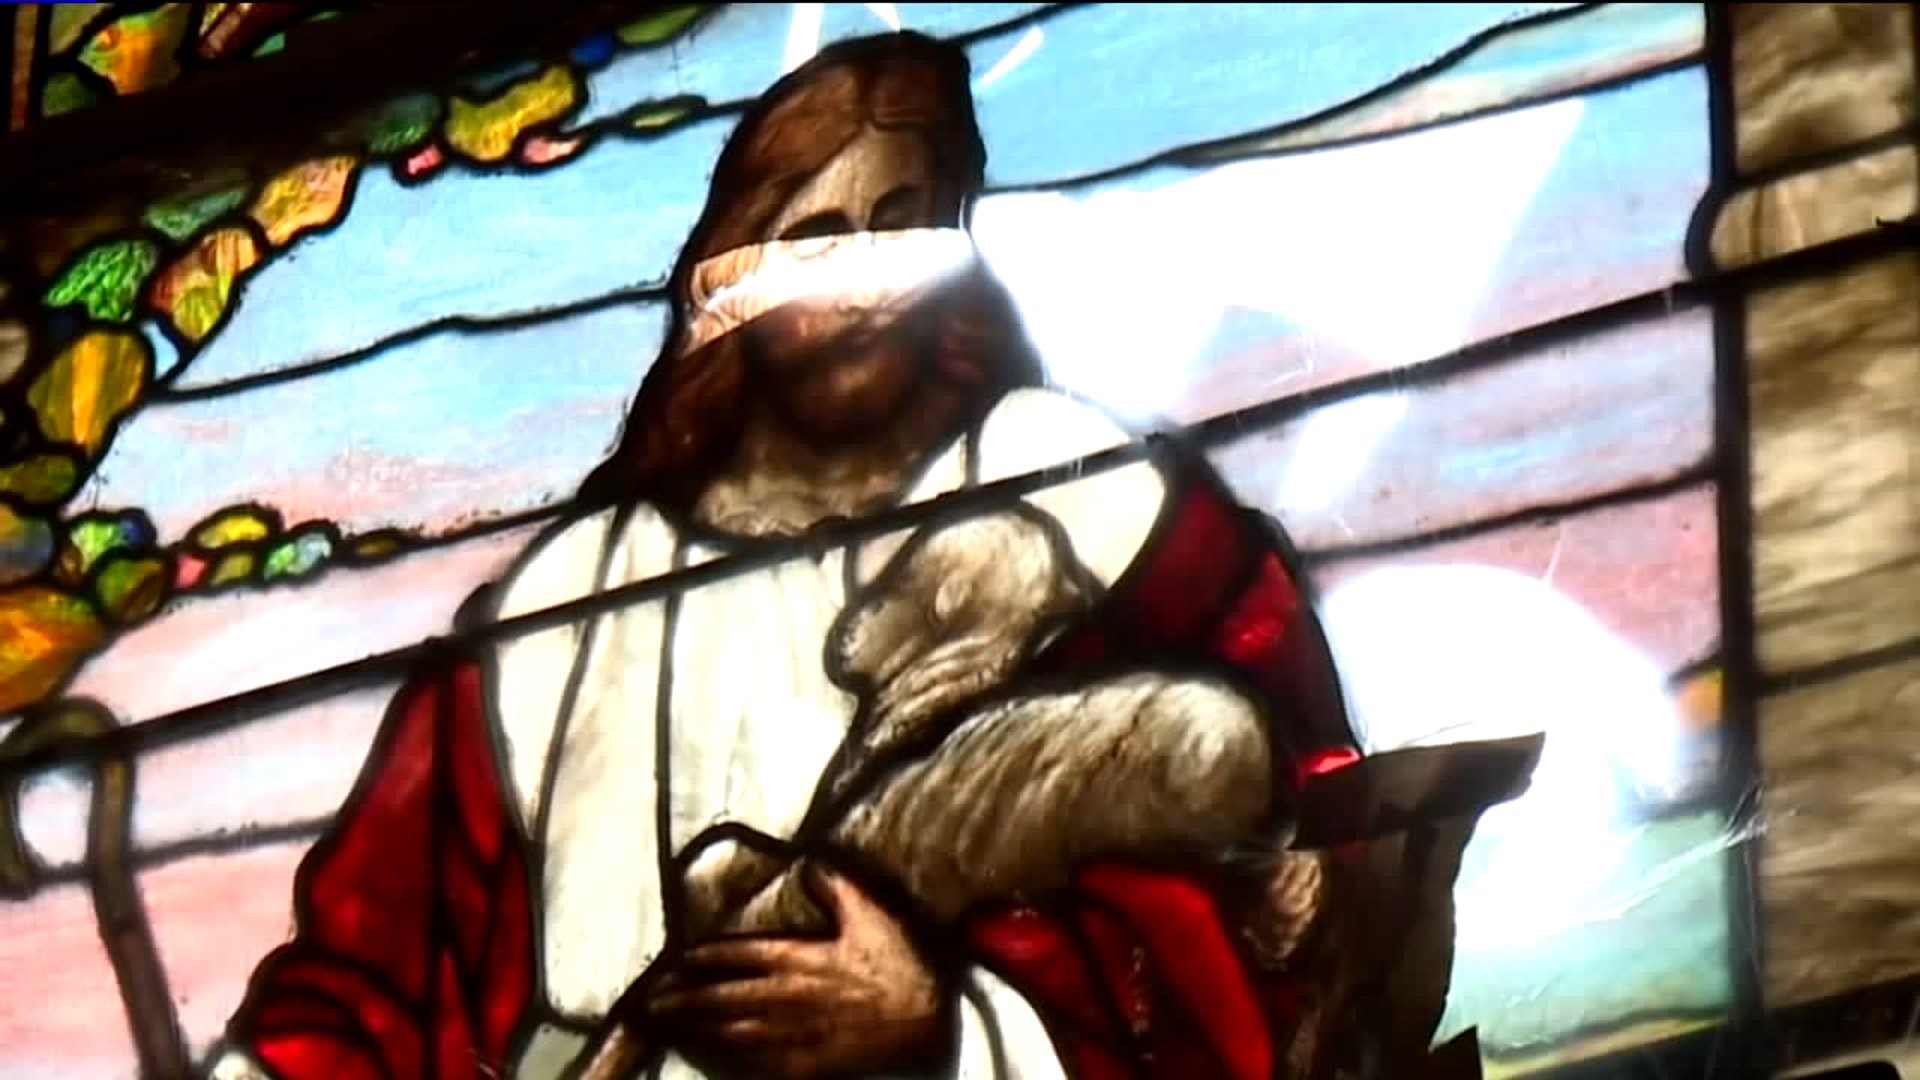 Vandal Smashes Stained-Glass Window in Stroudsburg Church